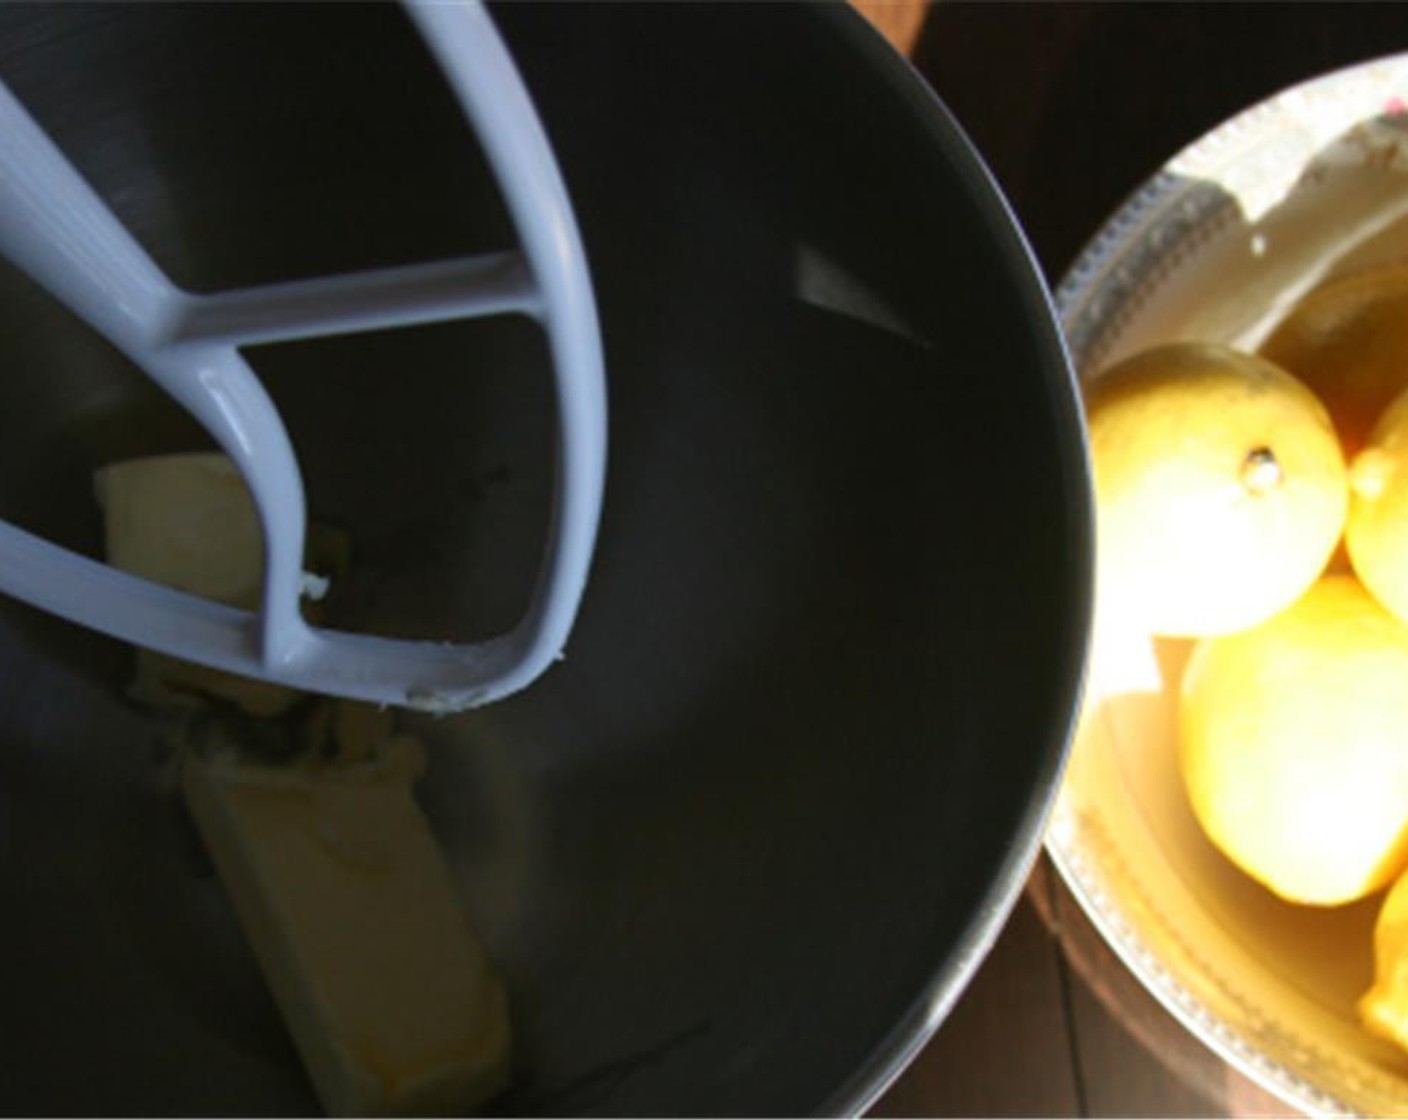 step 1 Cream Unsalted Butter (1/2 cup) and Granulated Sugar (3/4 cup) in the bowl of a stand mixer until light and fluffy.